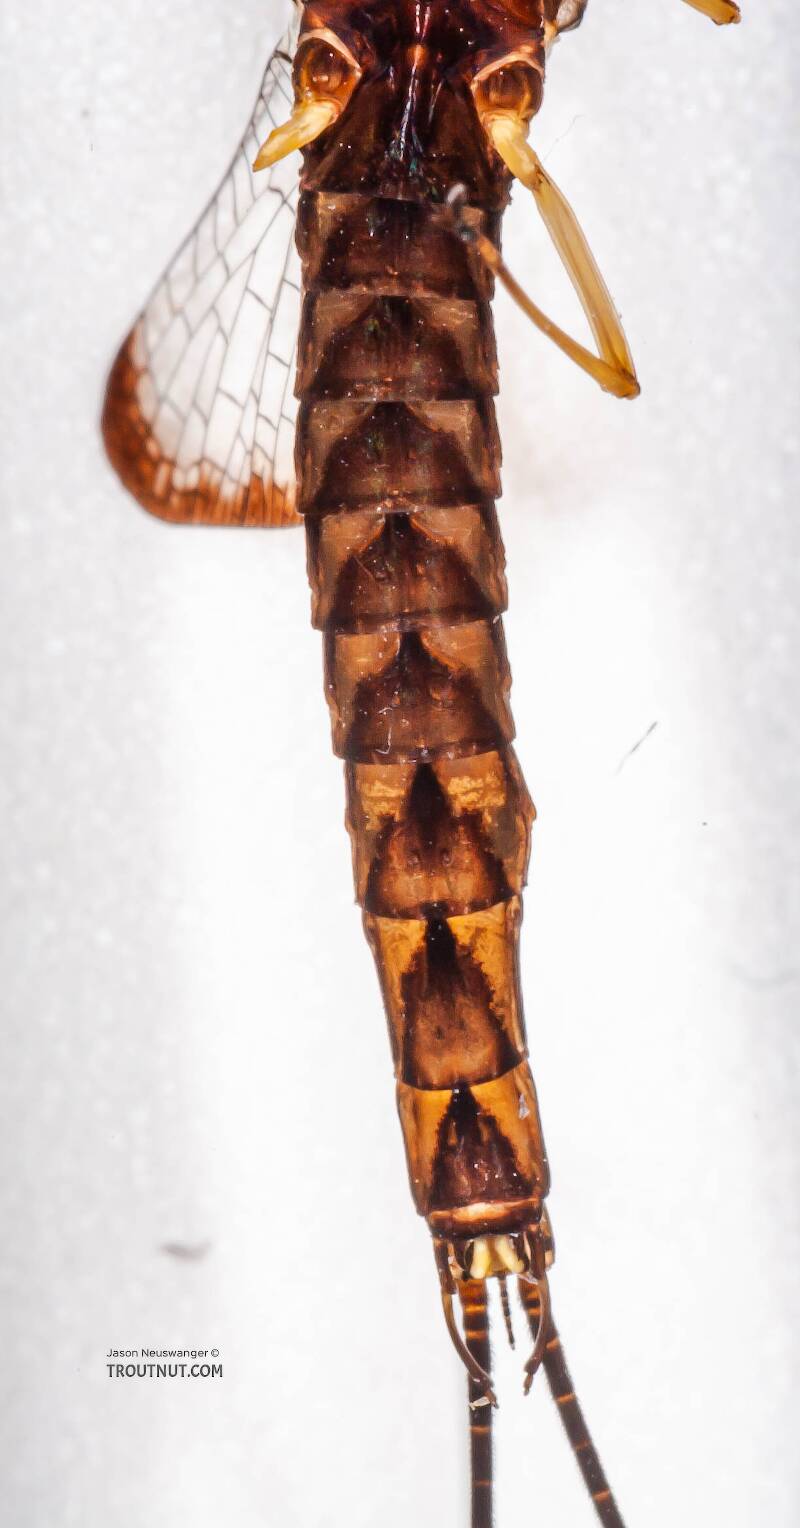 Ventral view of a Male Hexagenia atrocaudata (Ephemeridae) (Late Hex) Mayfly Spinner from the Namekagon River in Wisconsin